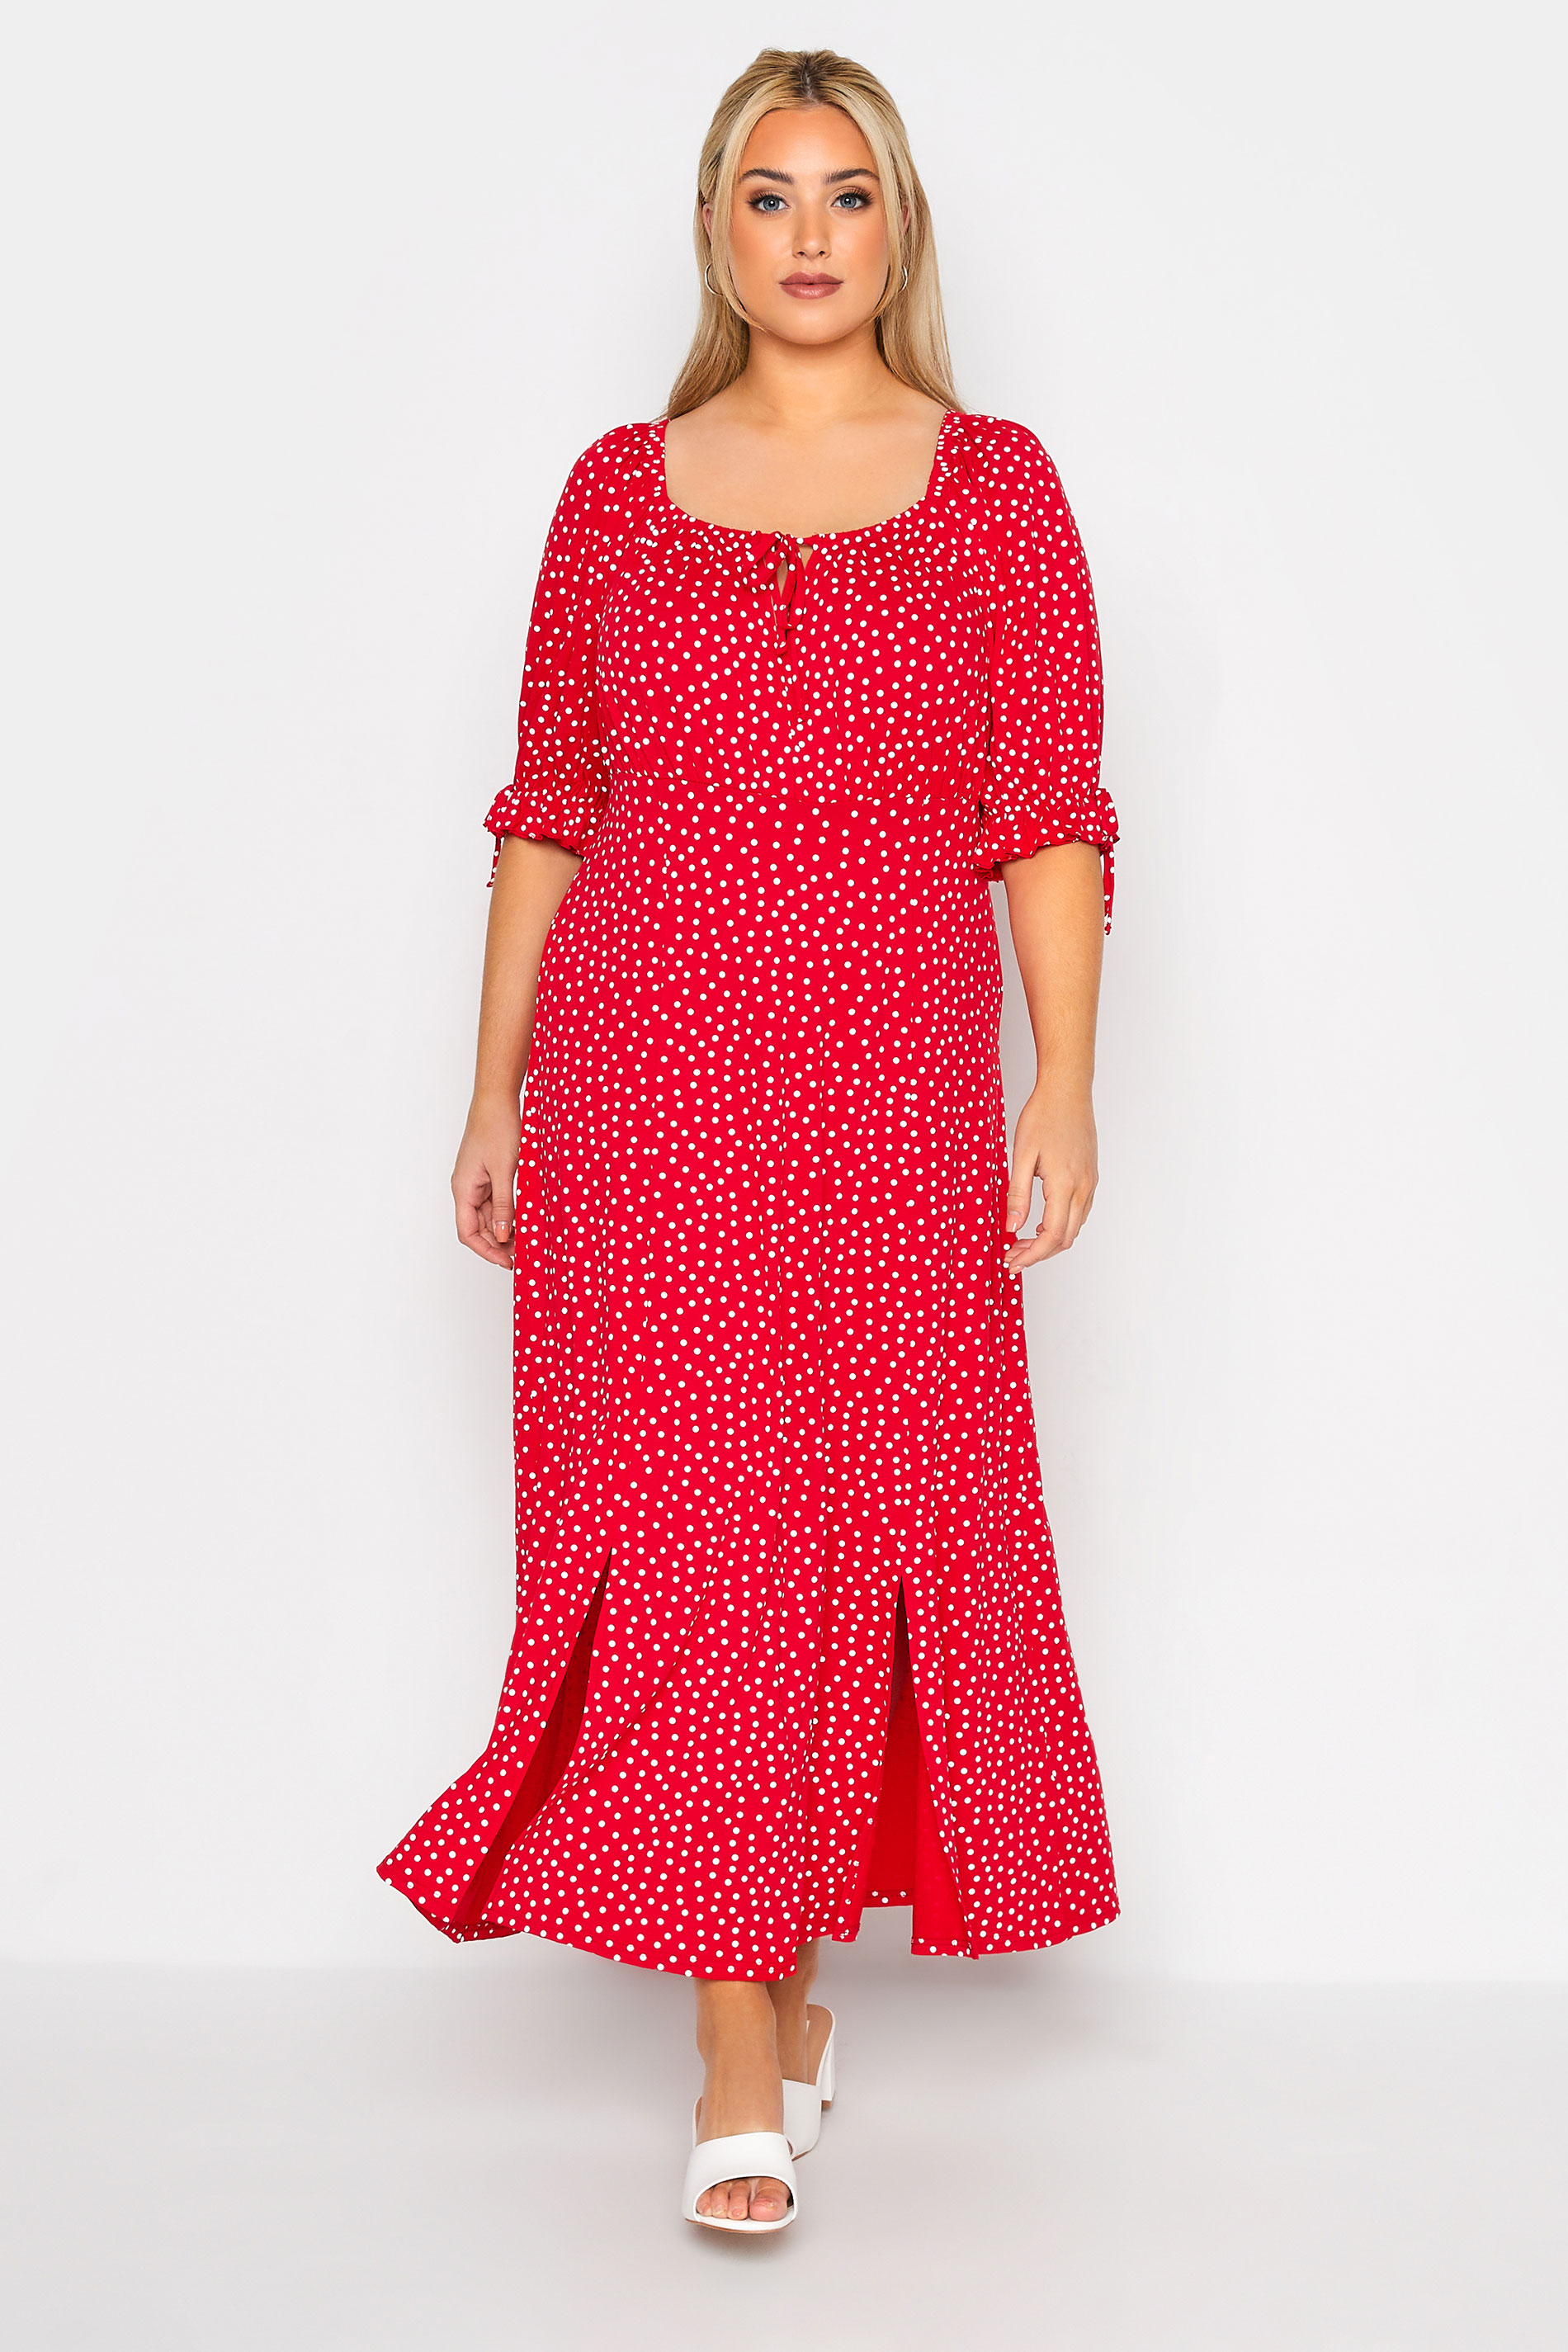 Robes Grande Taille Grande taille  Robes Longues | LIMITED COLLECTION - Robe Rouge Maxi Style Milkmaid à Pois - II33767